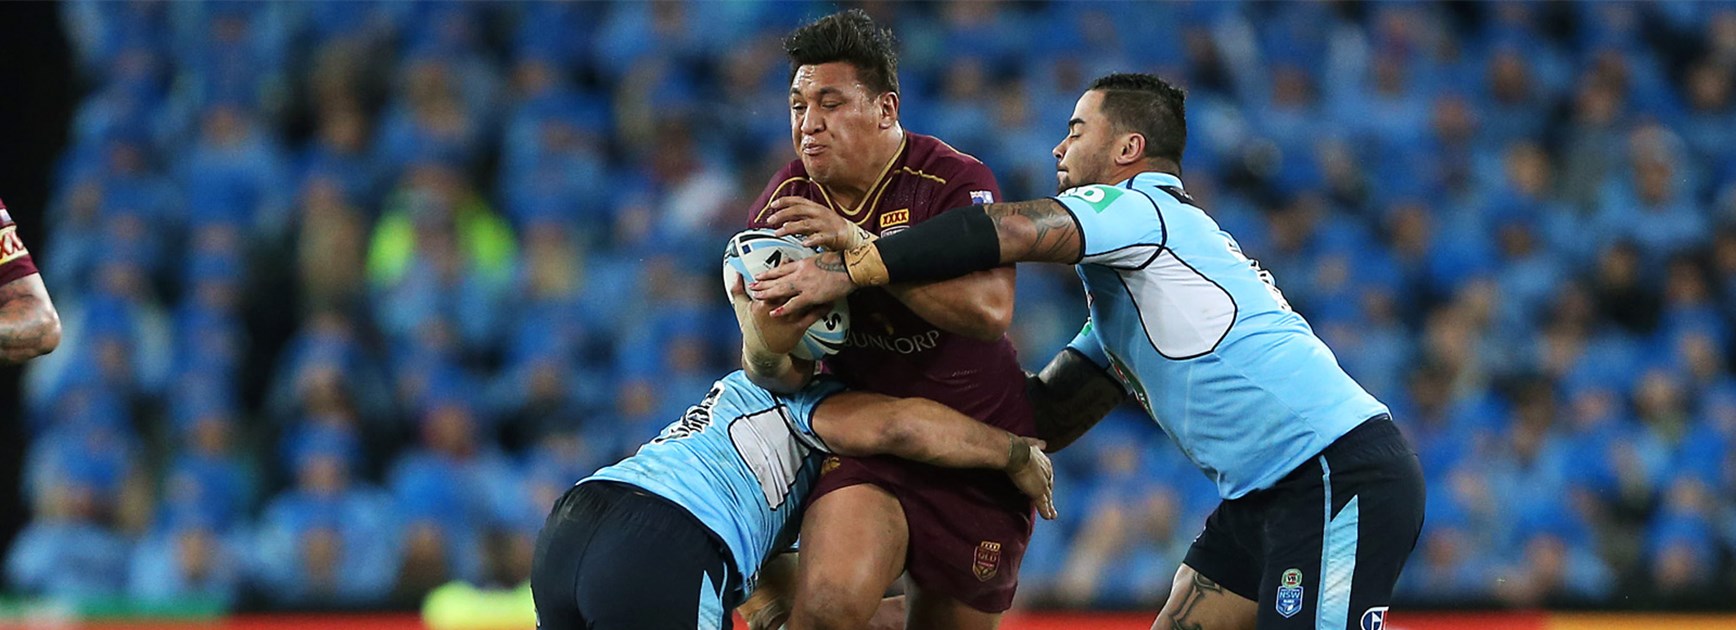 Queensland's Josh Papalii meets the Blues defence in State of Origin I in Sydney.